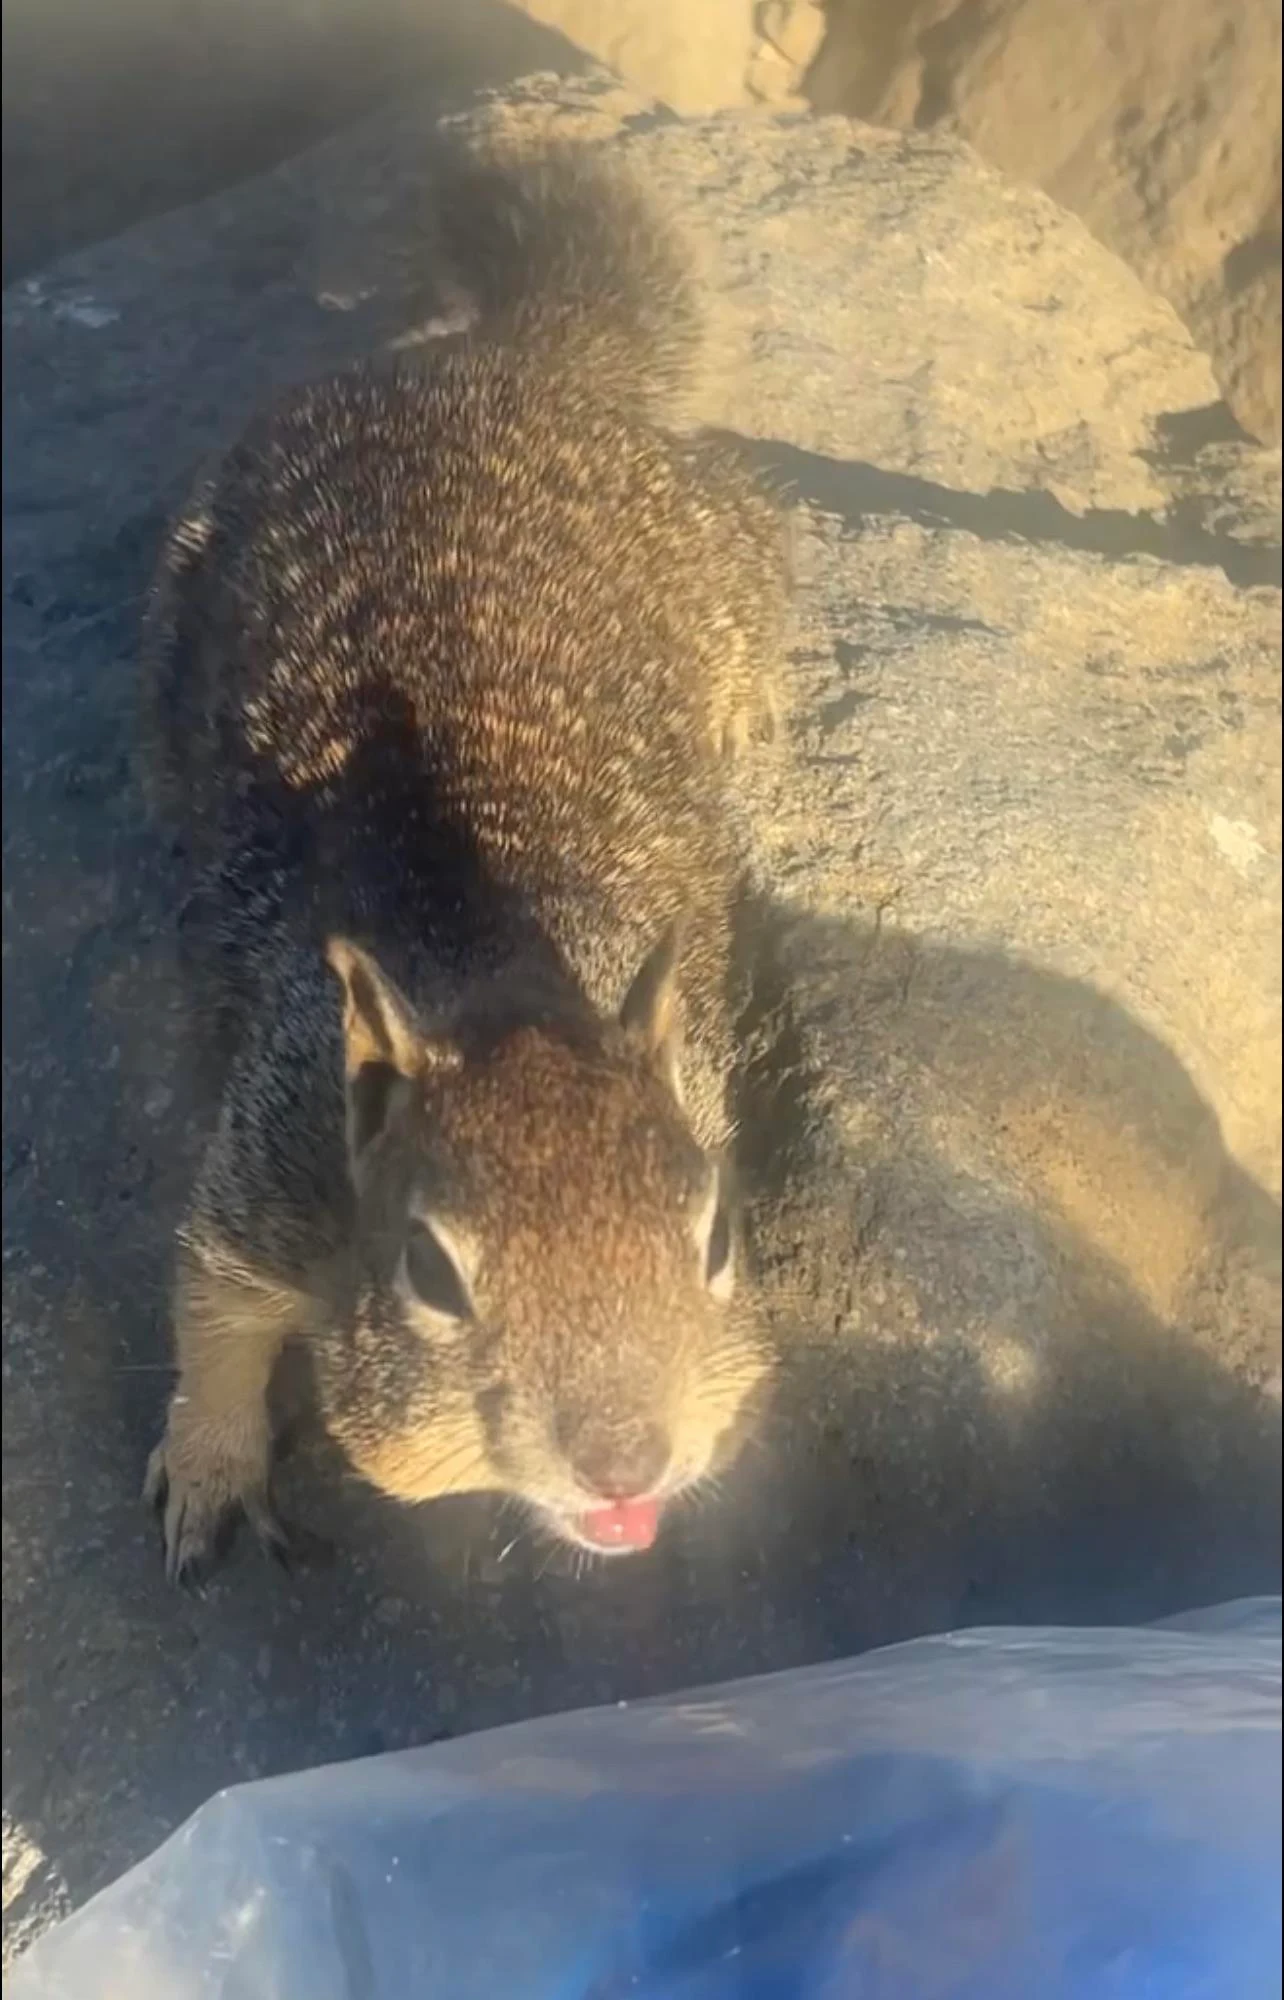 my squirrel friend begging for more wheat thins